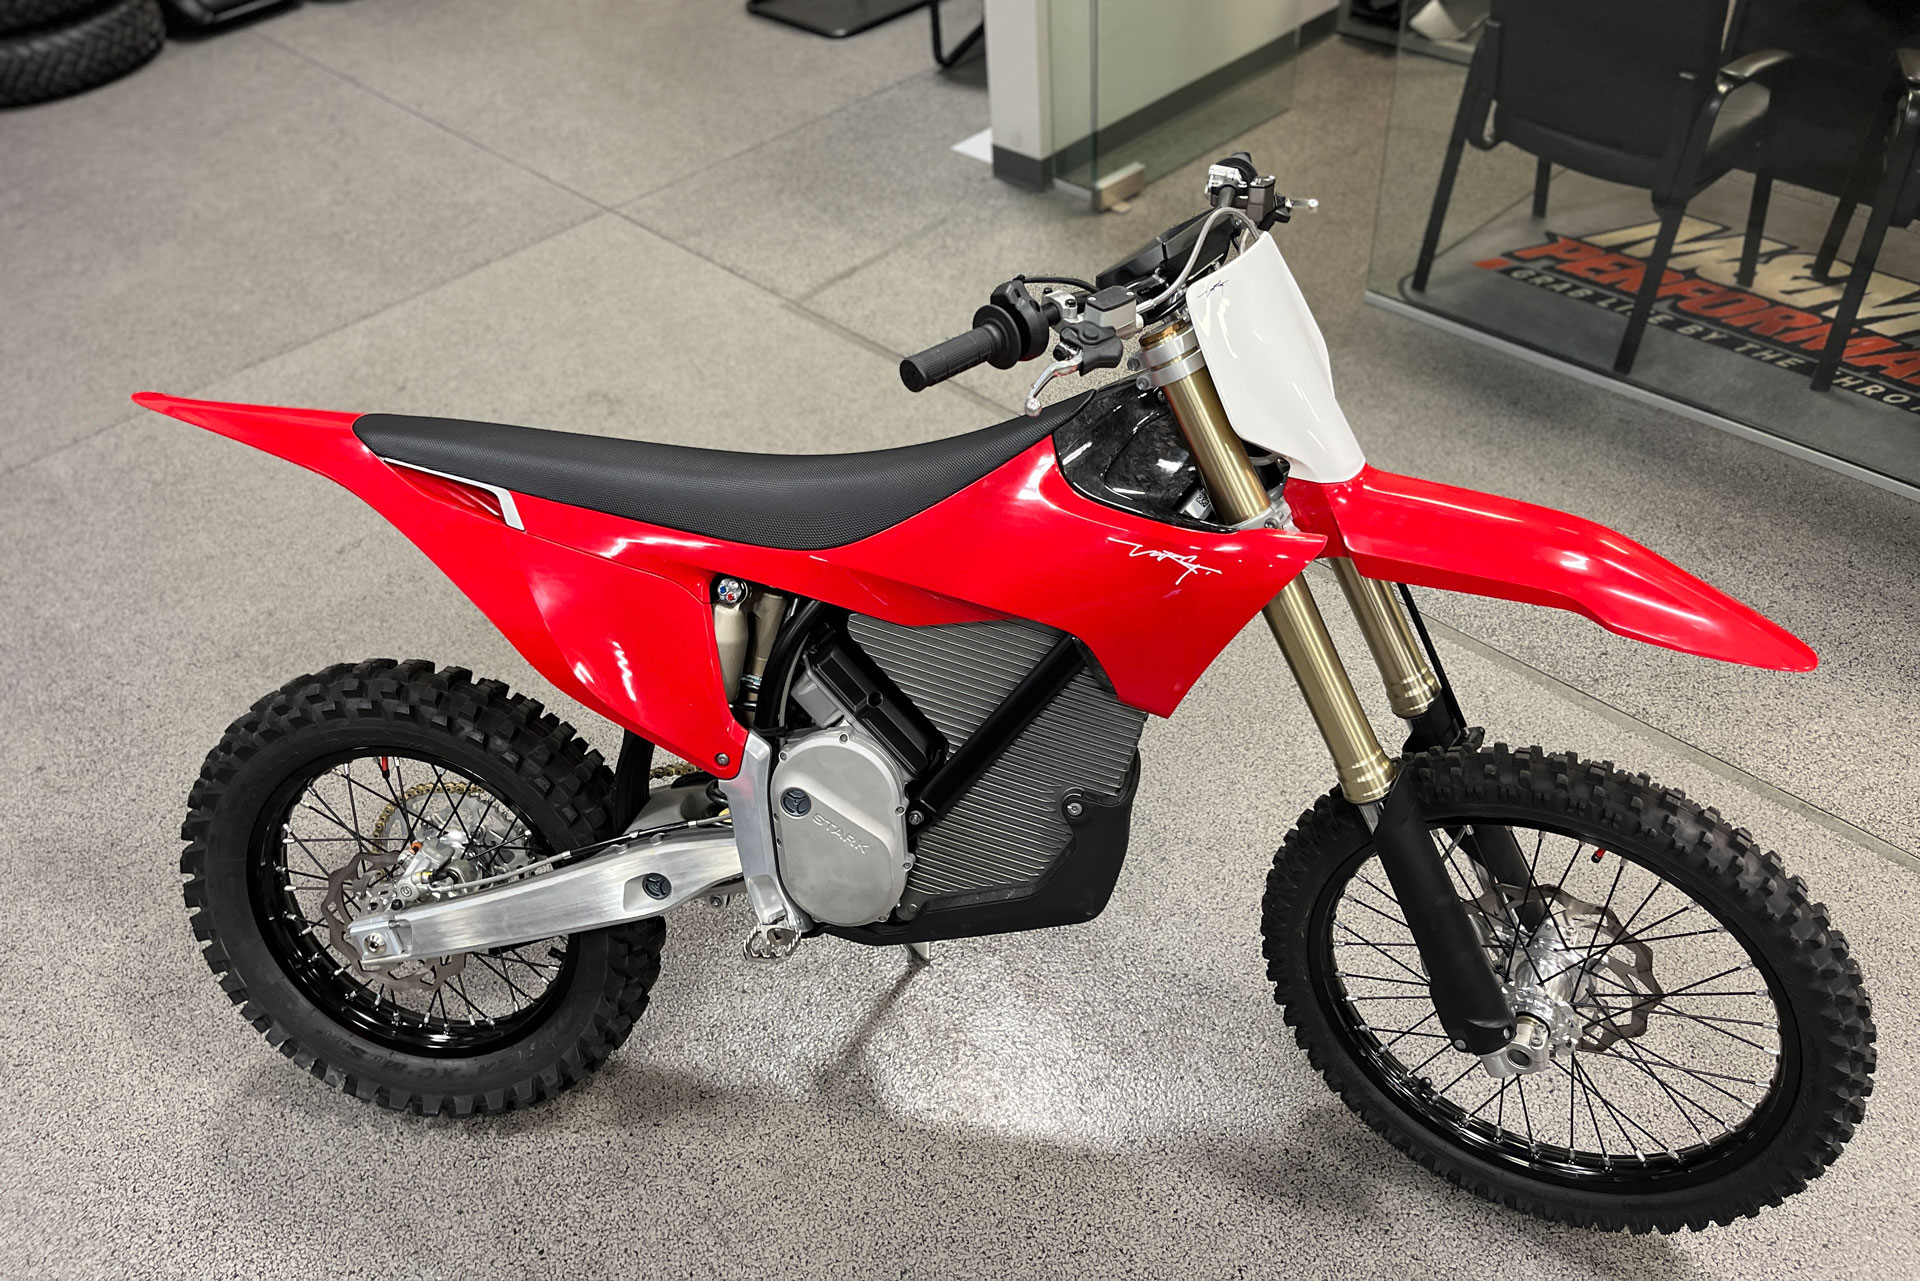 The VARG motocross bike from Stark Future stands in a showroom,